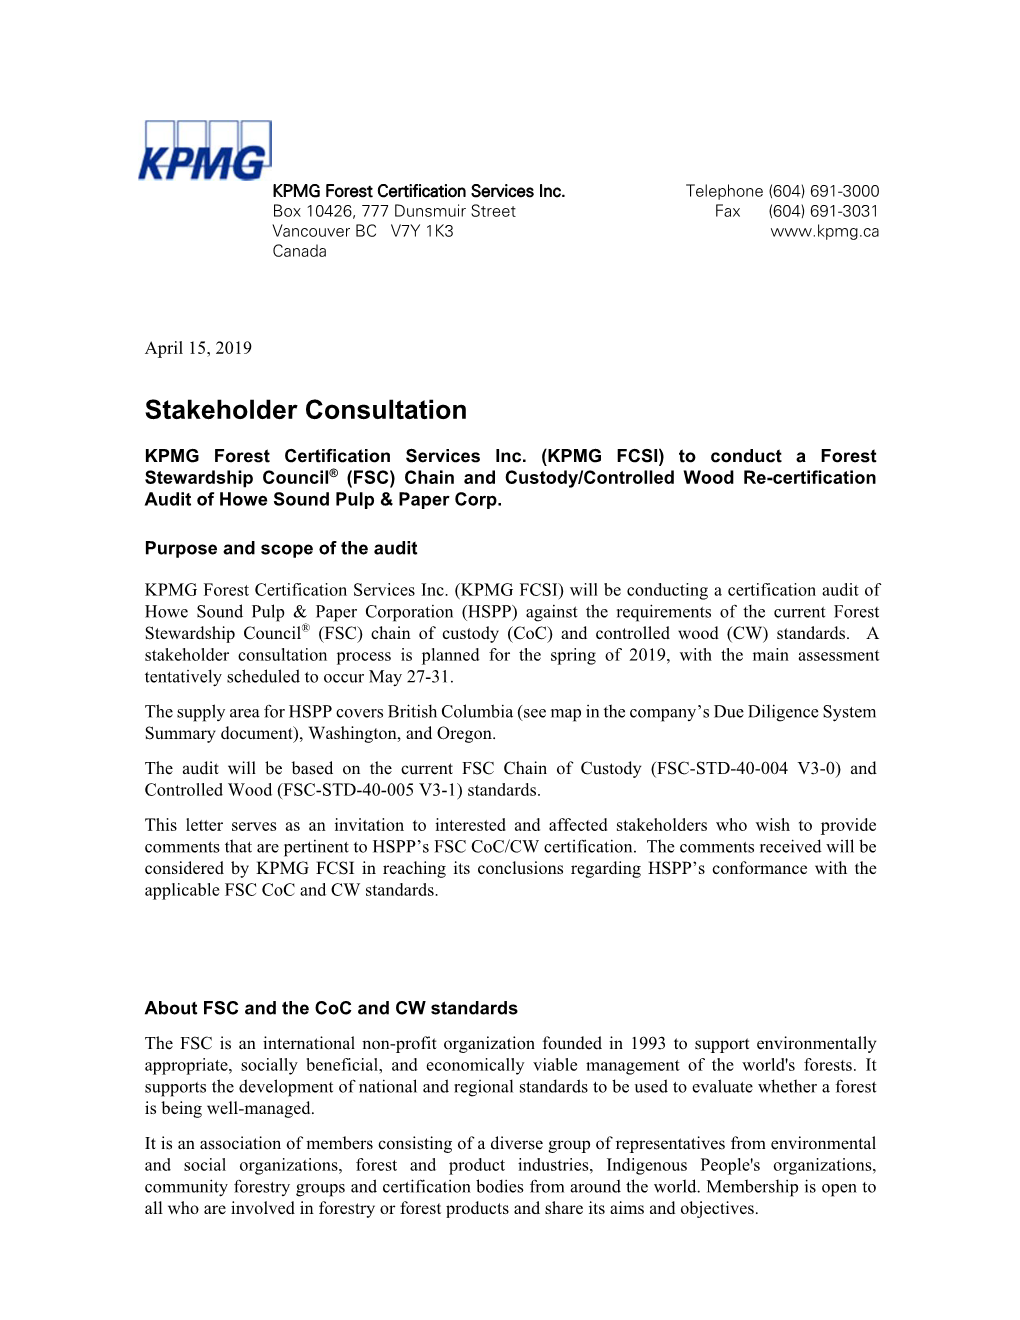 Stakeholder Consultation: KPMG Forest Certification Services Inc